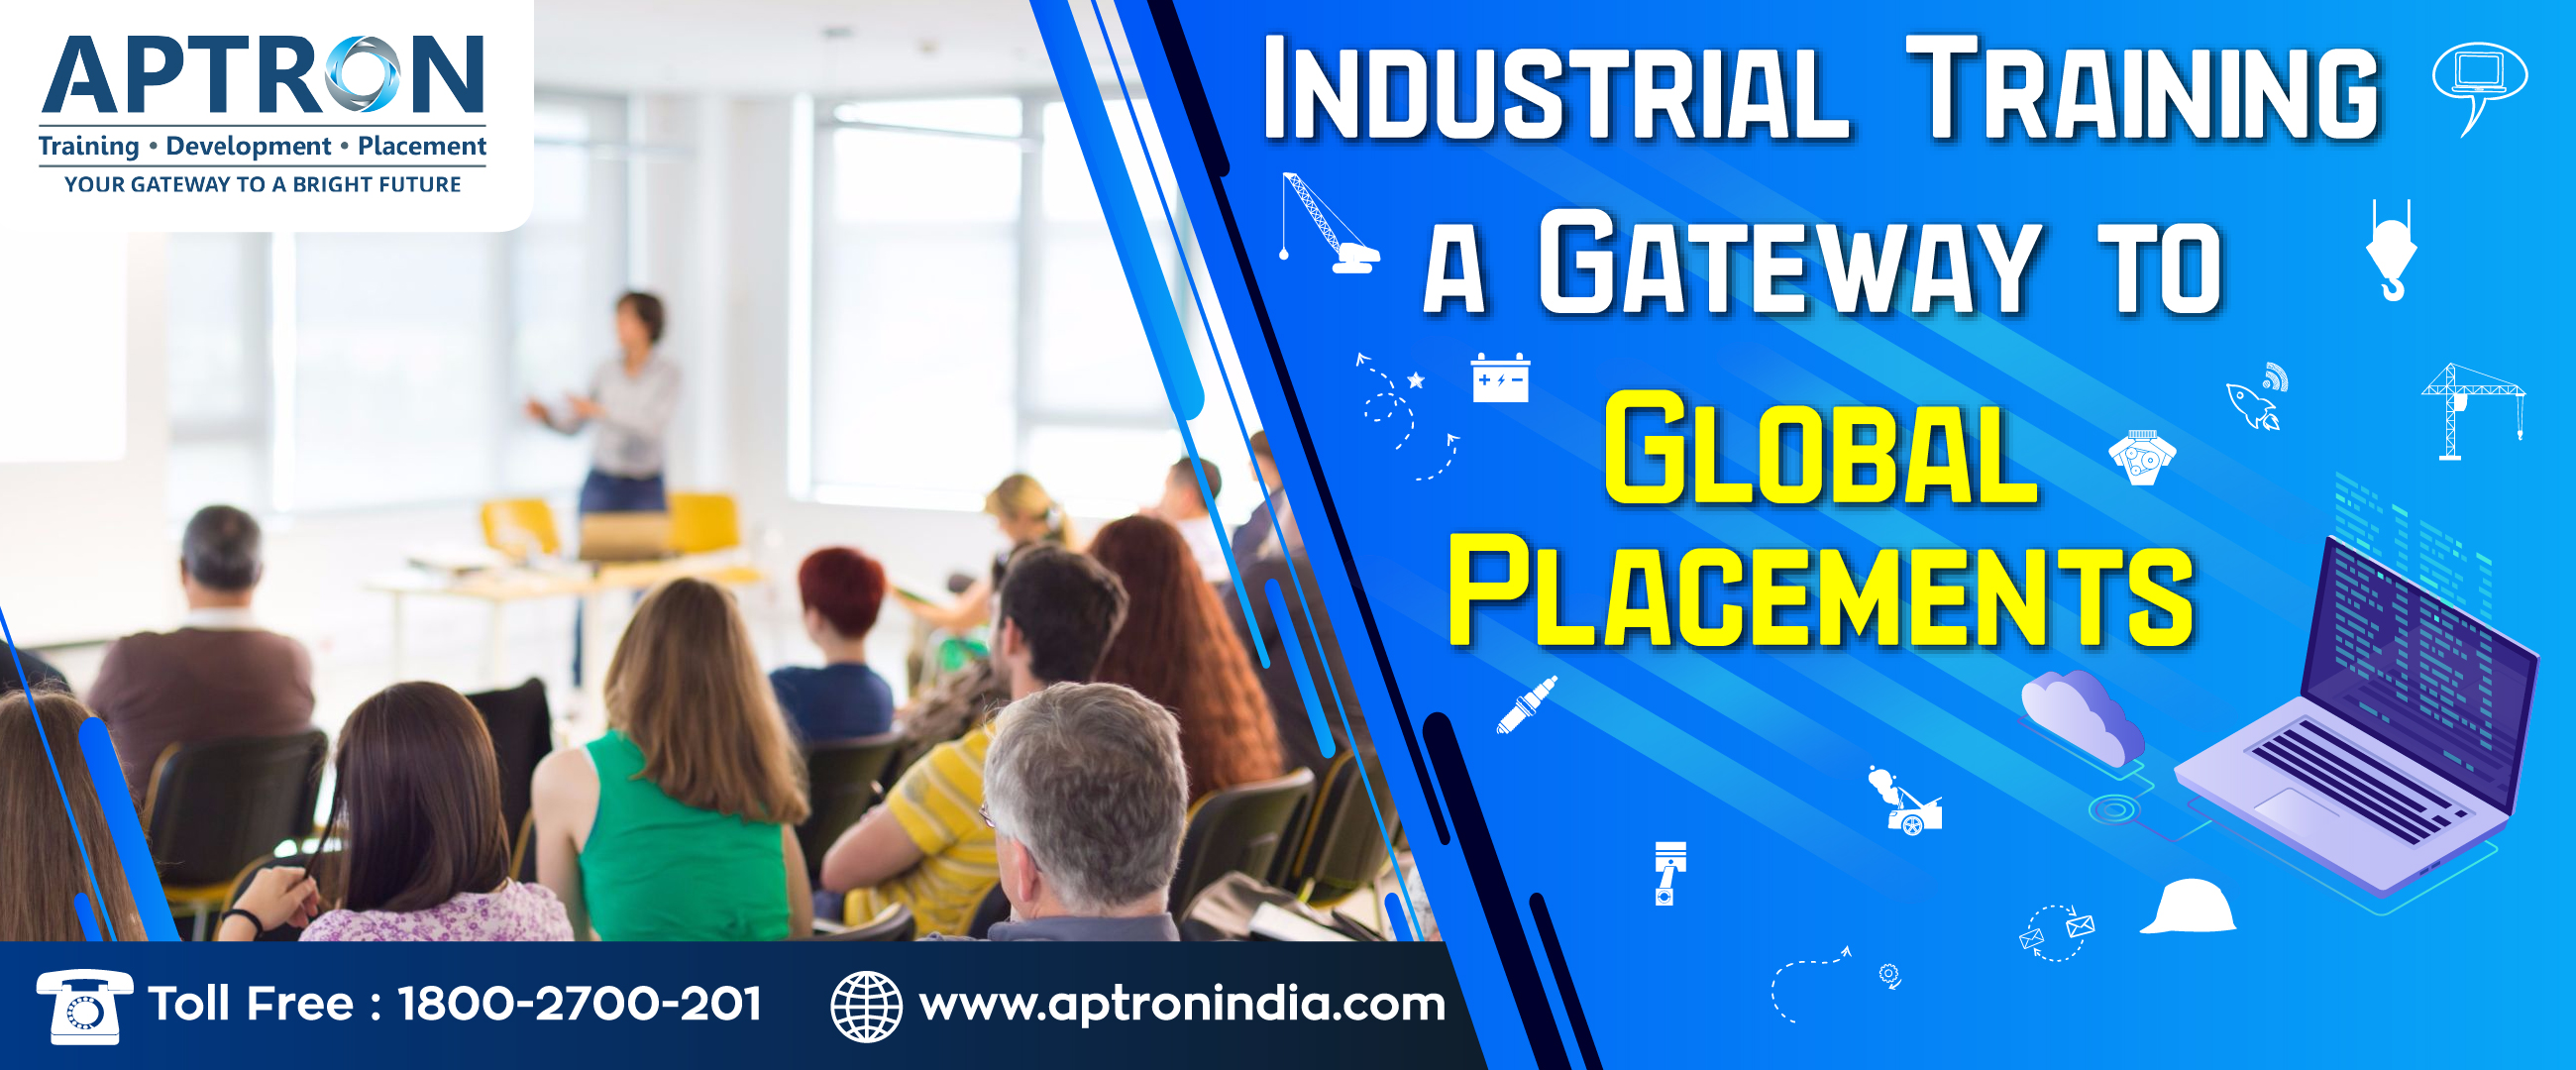 6 Months Industrial Training by aptron